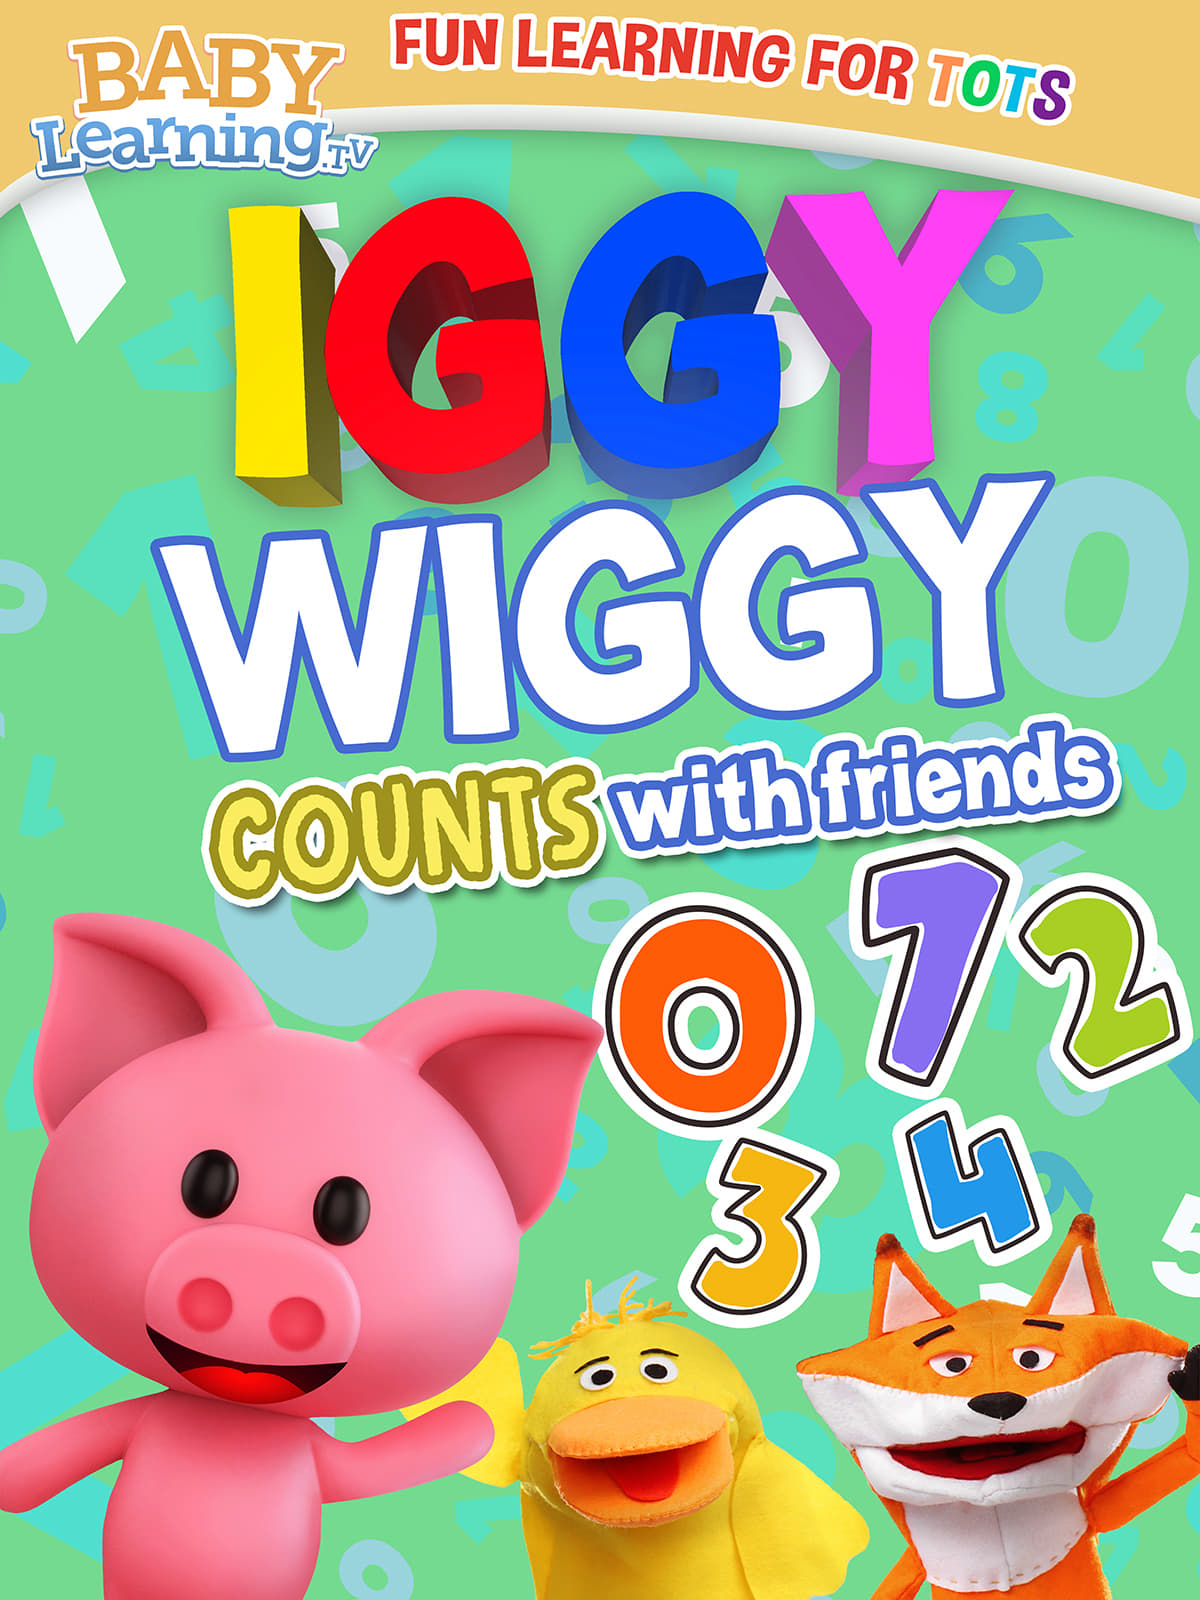 Iggy Wiggy Counts With Friends